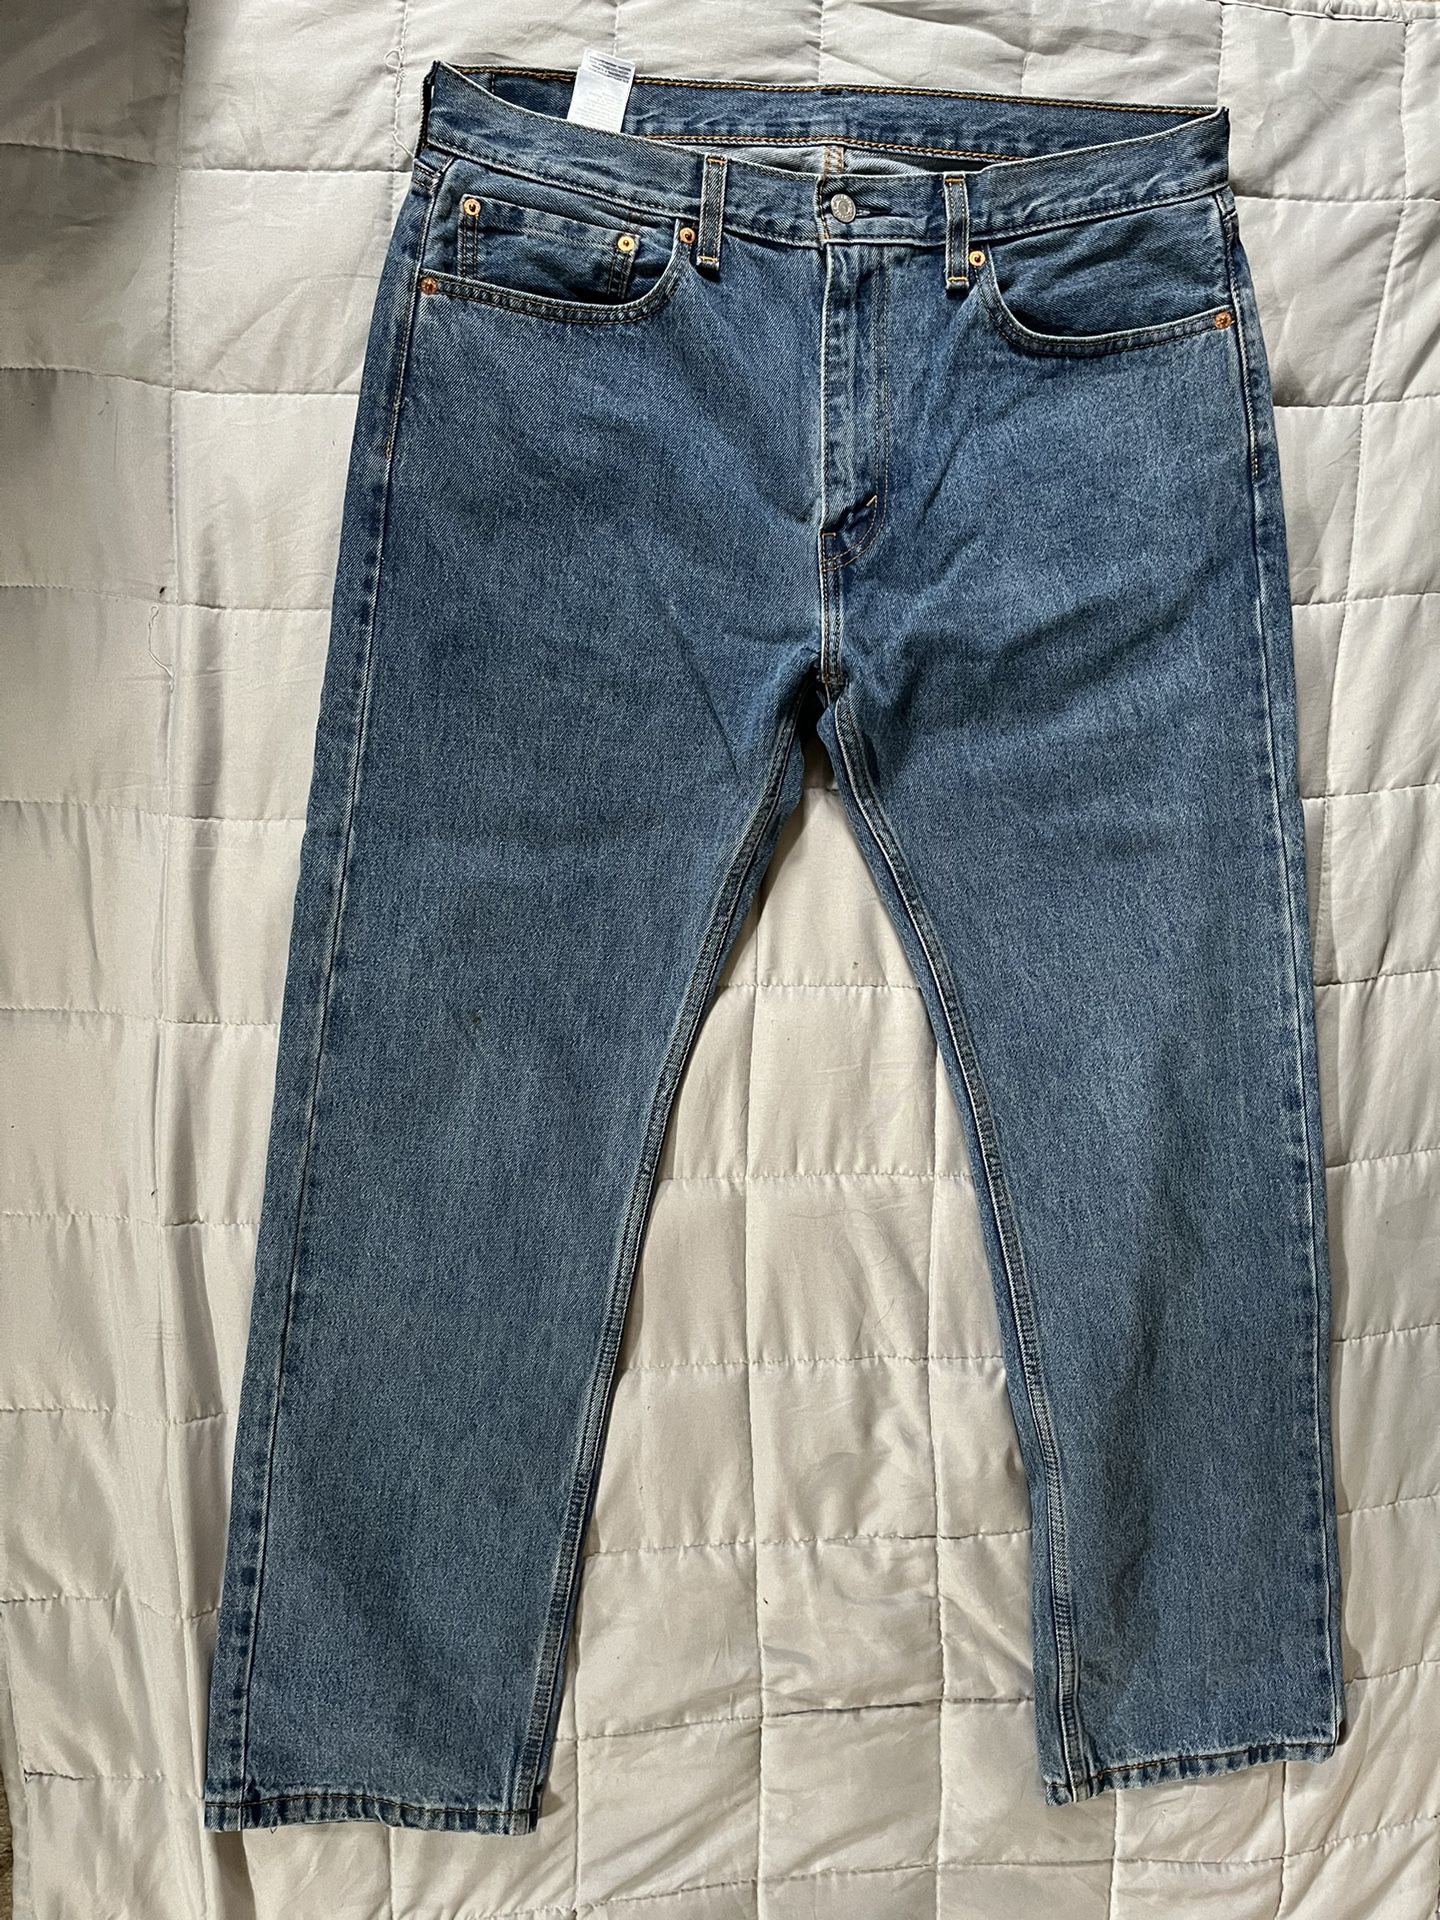 Levi’s 501s And 505s for Sale in Santa Ana, CA - OfferUp